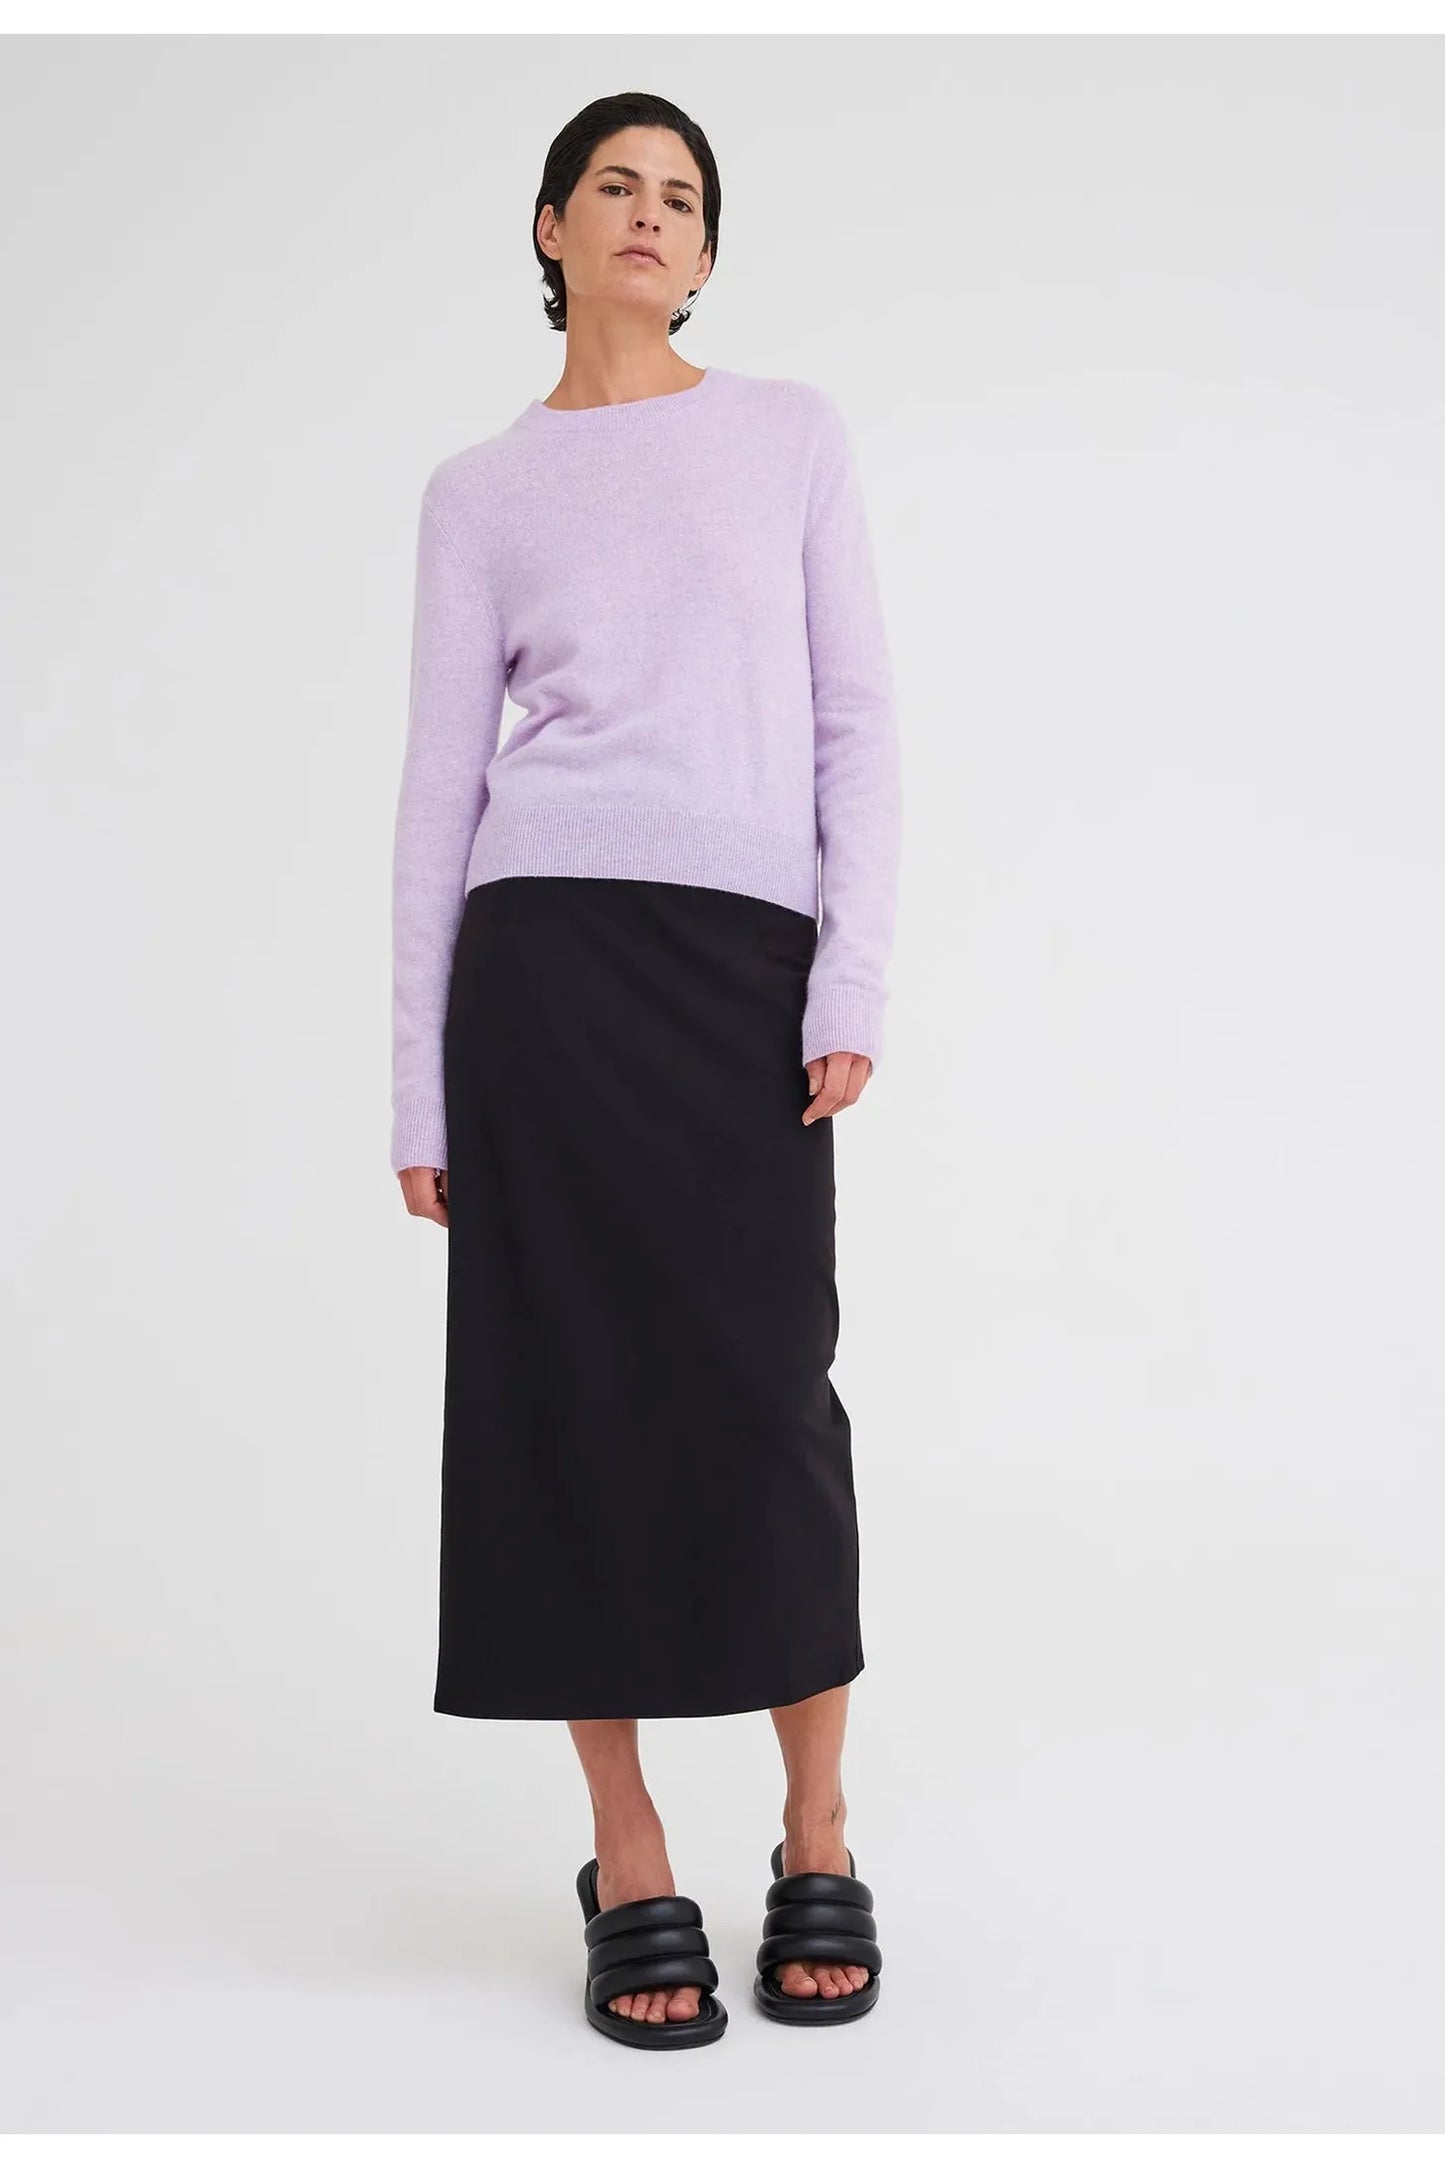 Peter Sweater in Lila Marle Purple by Jac + Jack